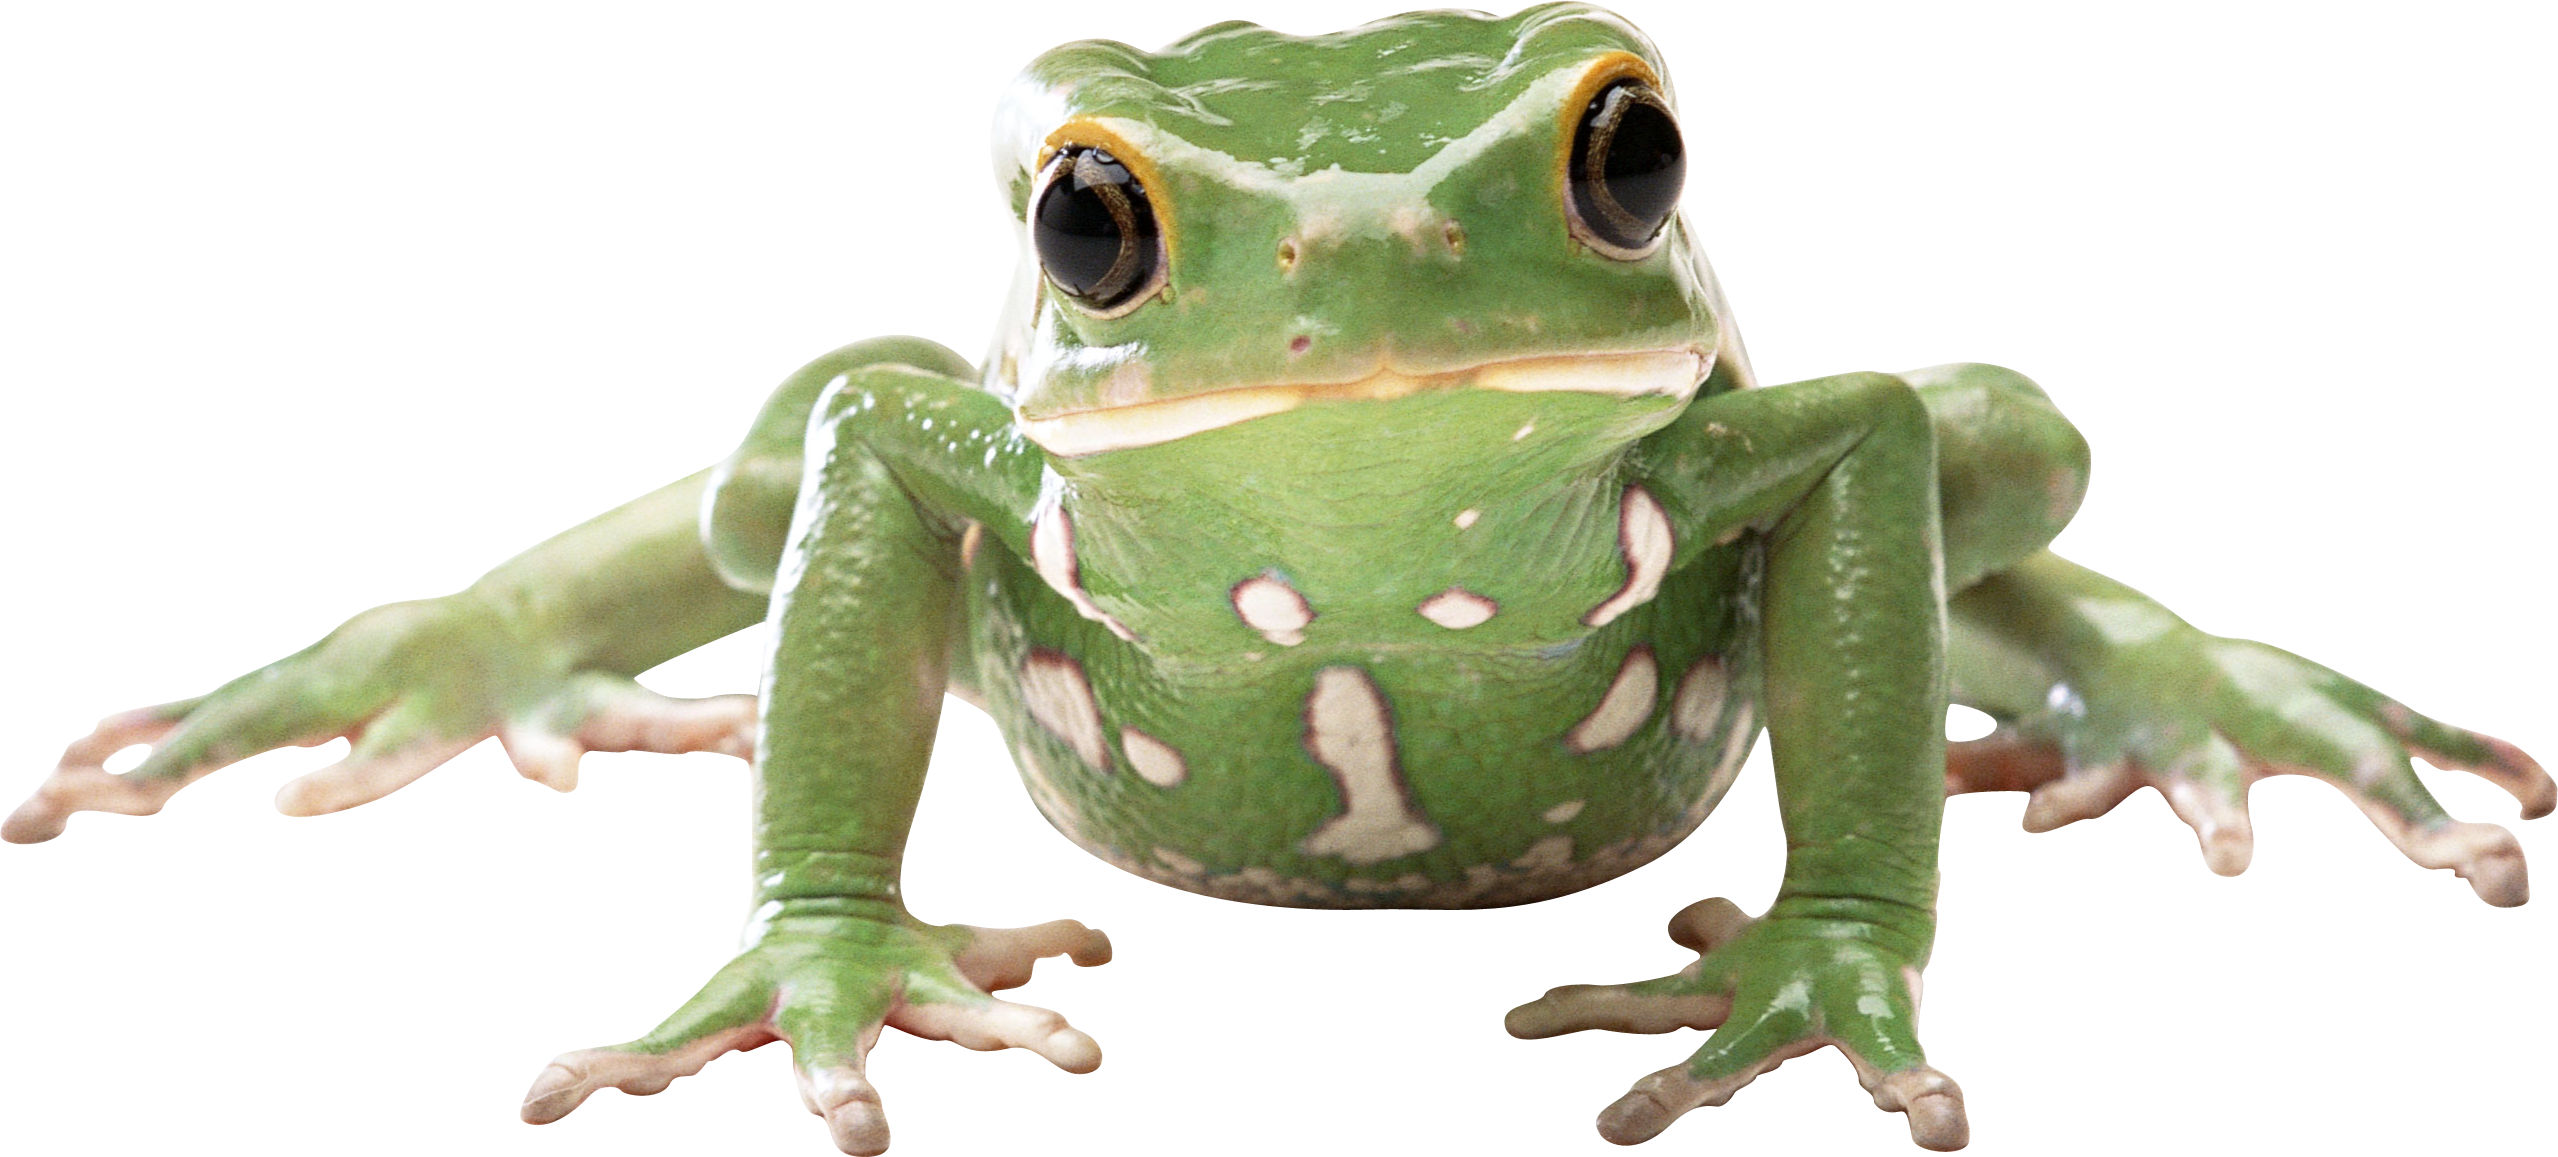 Frog Png Image Free Download Image, Frogs - Frog, Transparent background PNG HD thumbnail